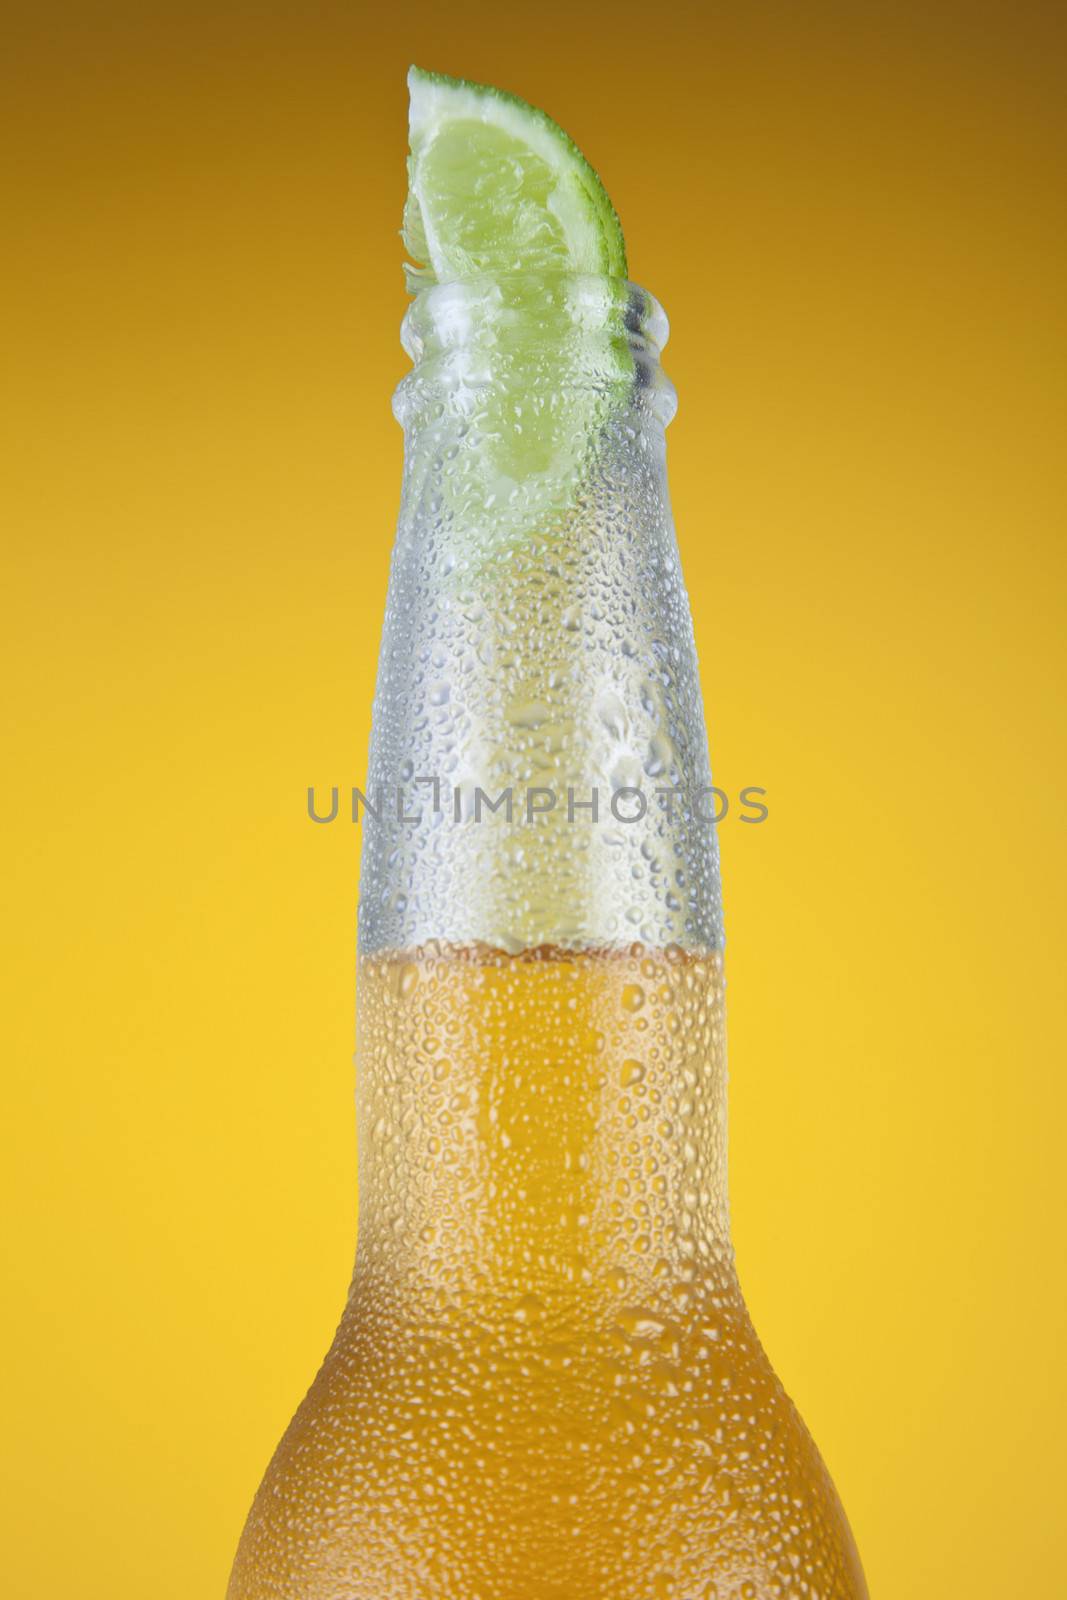 Mexican beer with a lime slice over a yellow background.